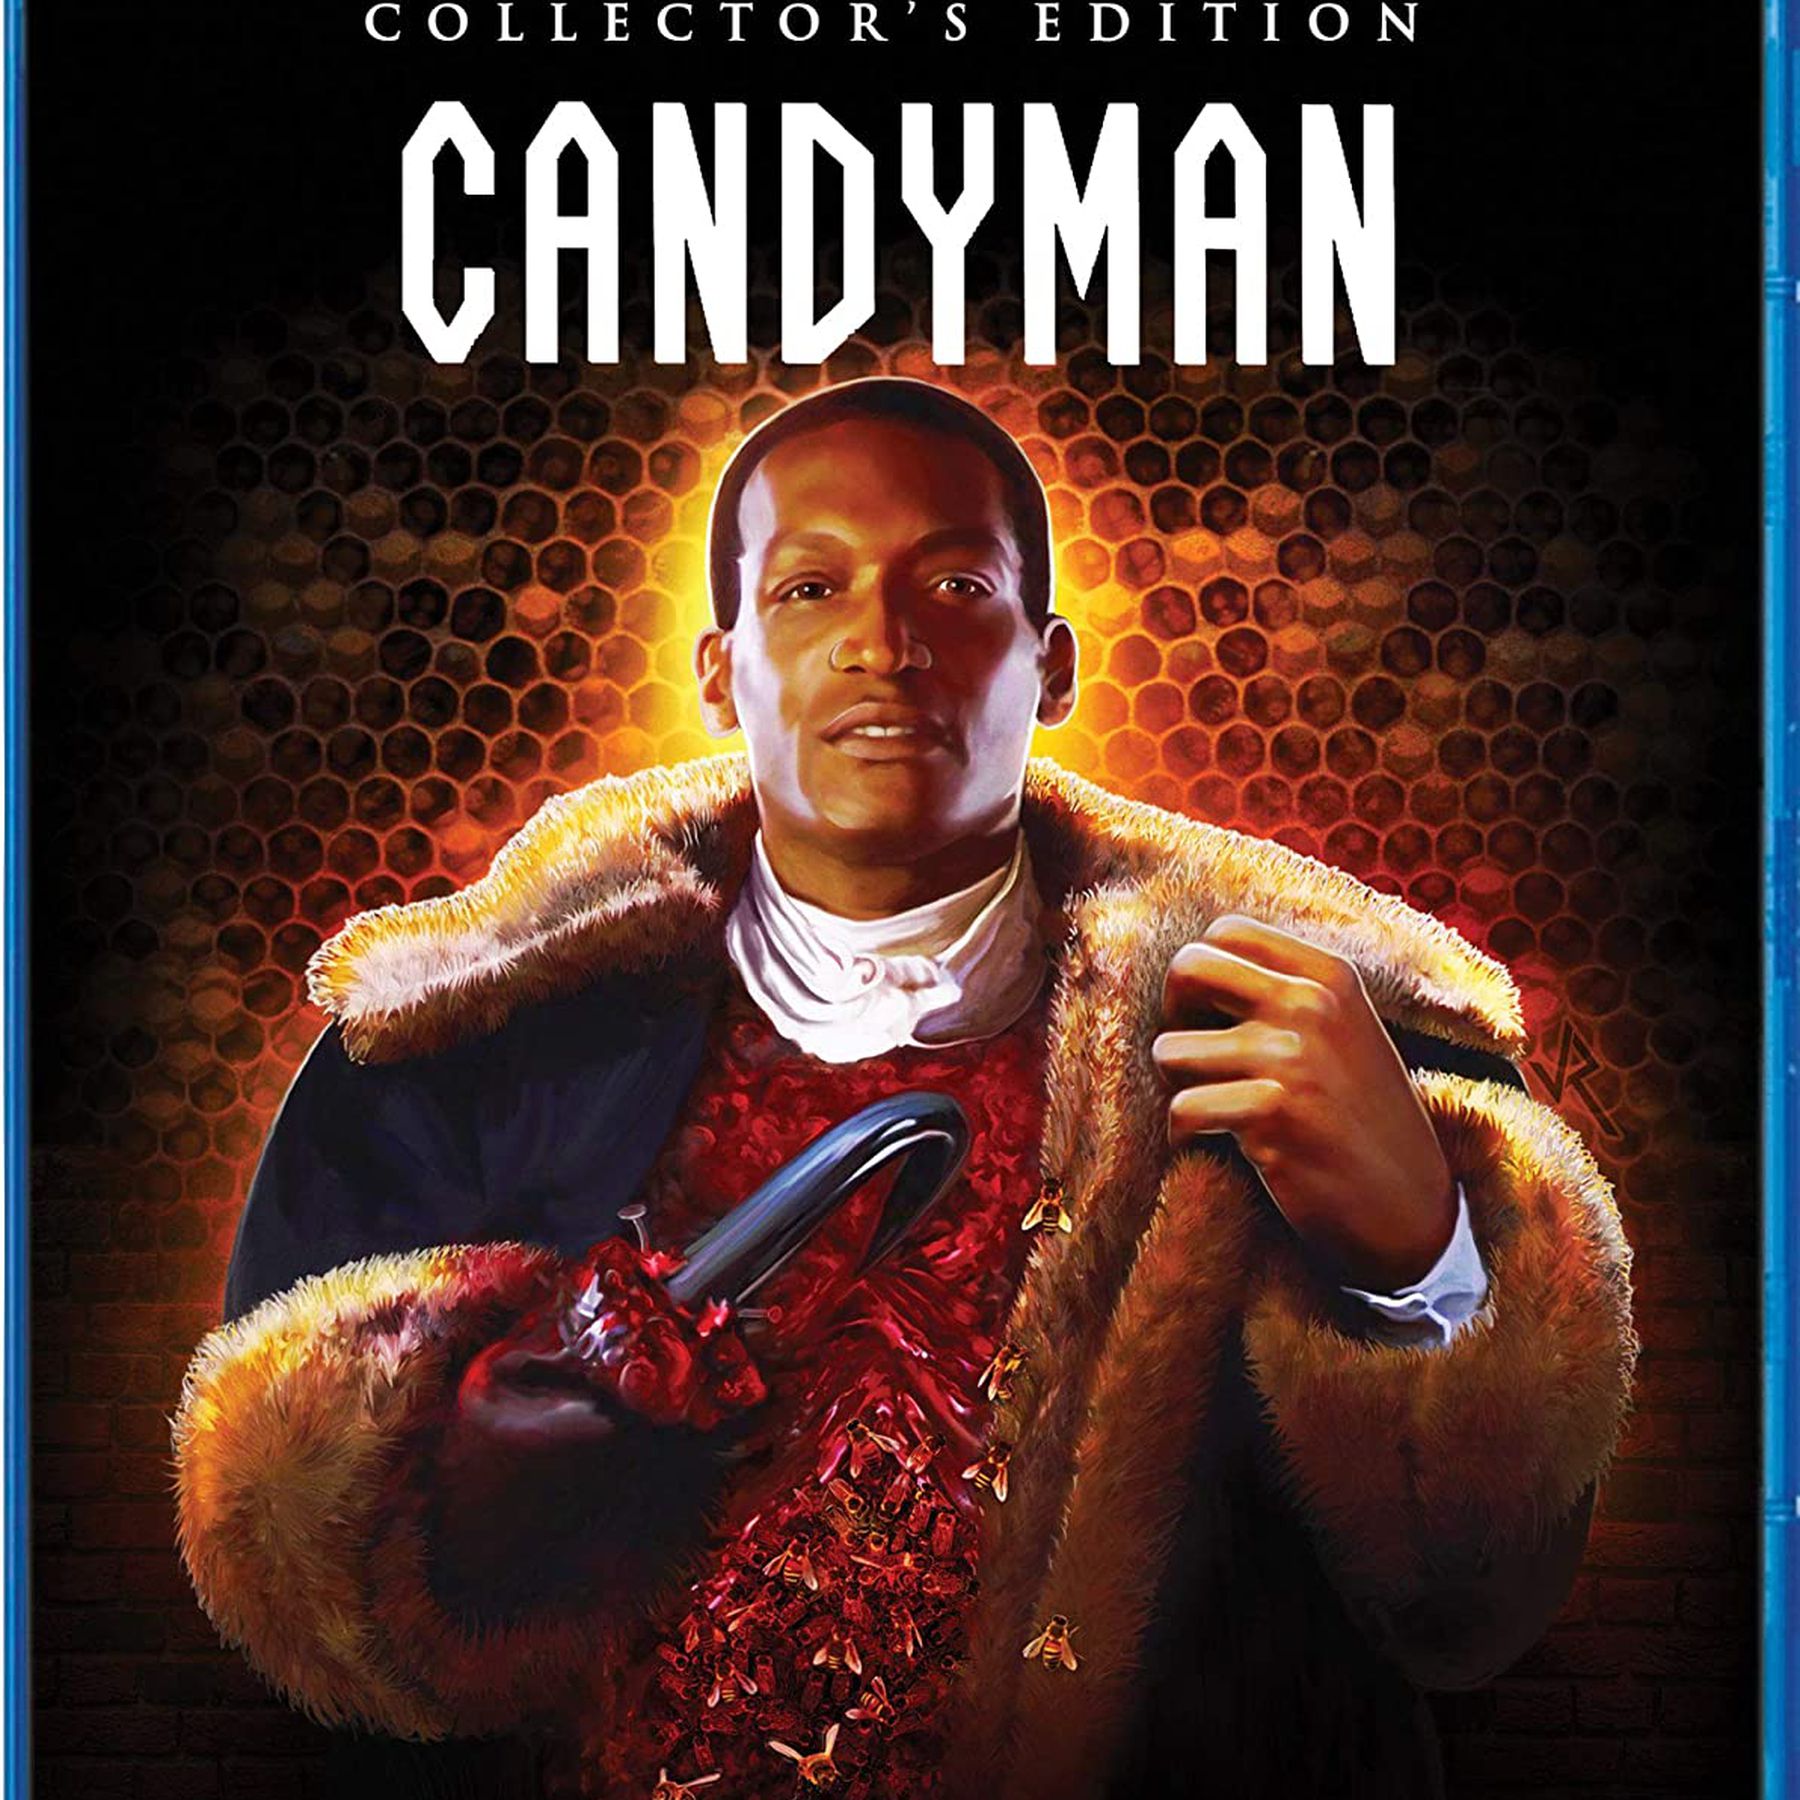 New Candyman trailer tackles racial history and horror origin stories